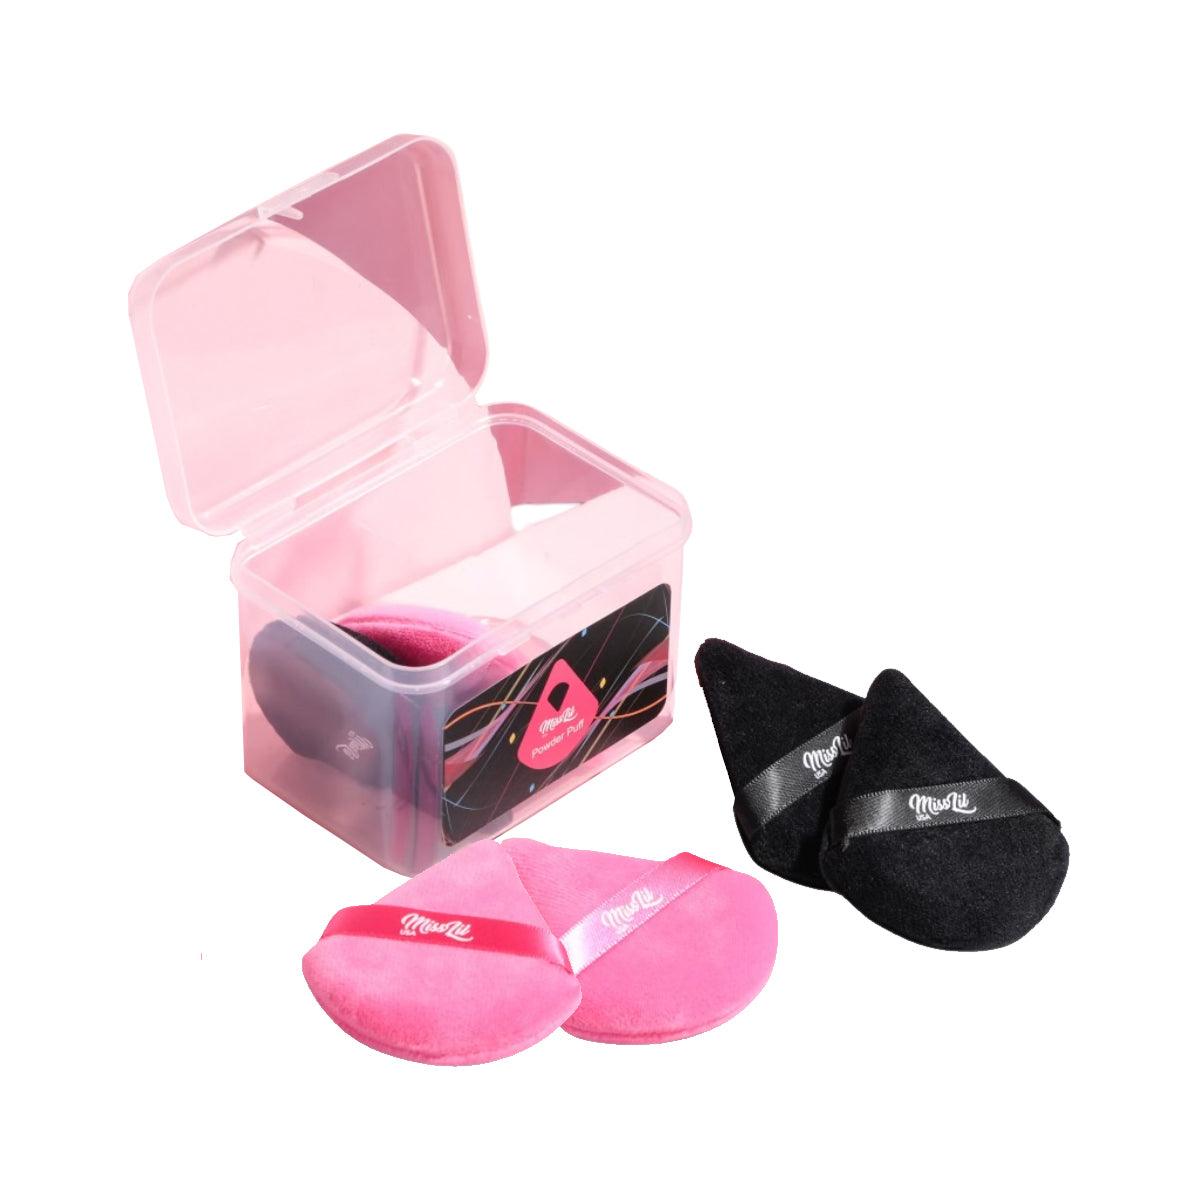 Powder puff pink and black in a box - Miss Lil USA Wholesale